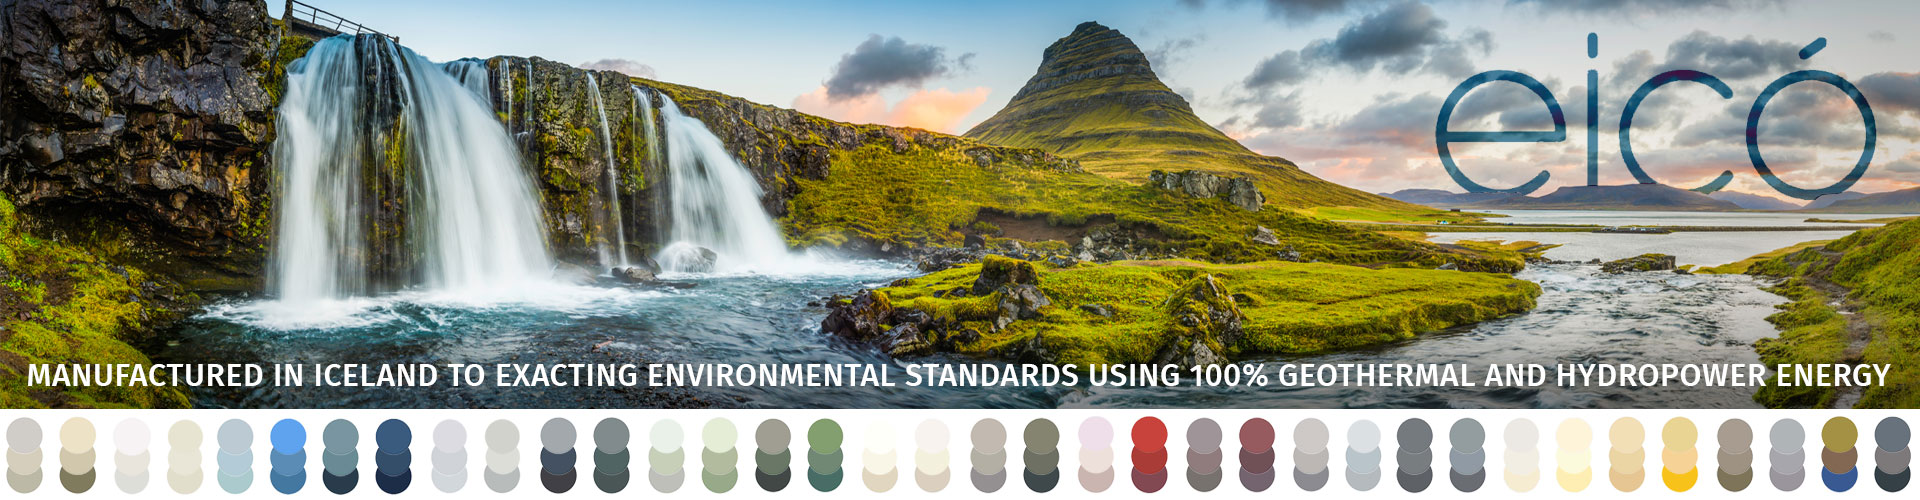 eico paints are manufactured in iceland